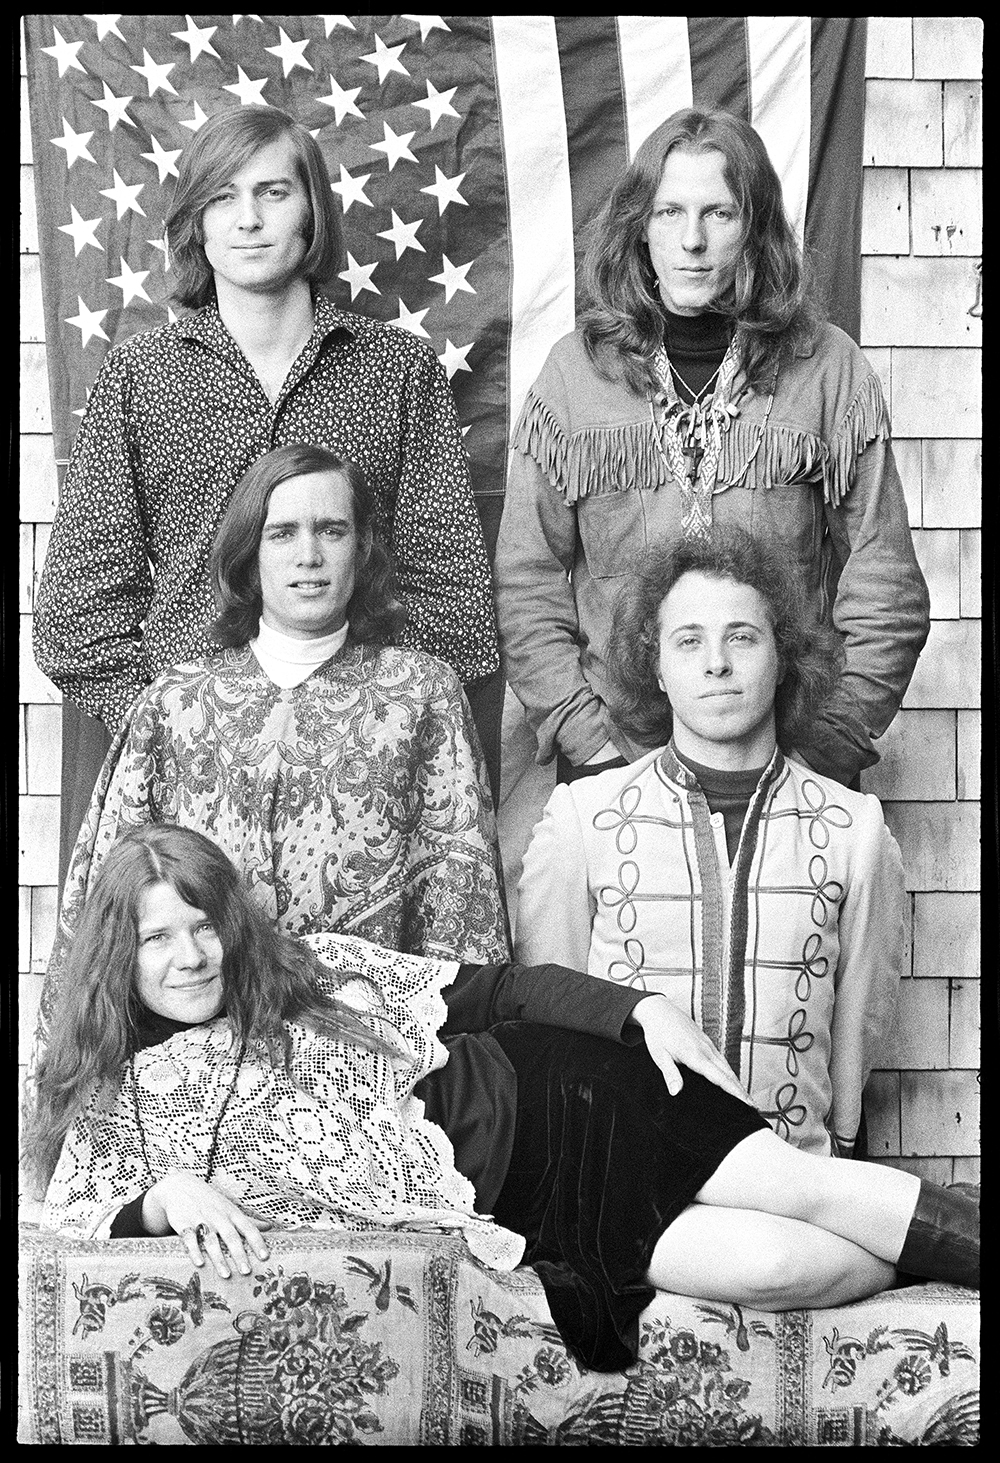 a black-and-white 1967 group photo of the band Big Brother and the Holding Company, with lead singer Janis Joplin lying on her side in front of the four other band members.